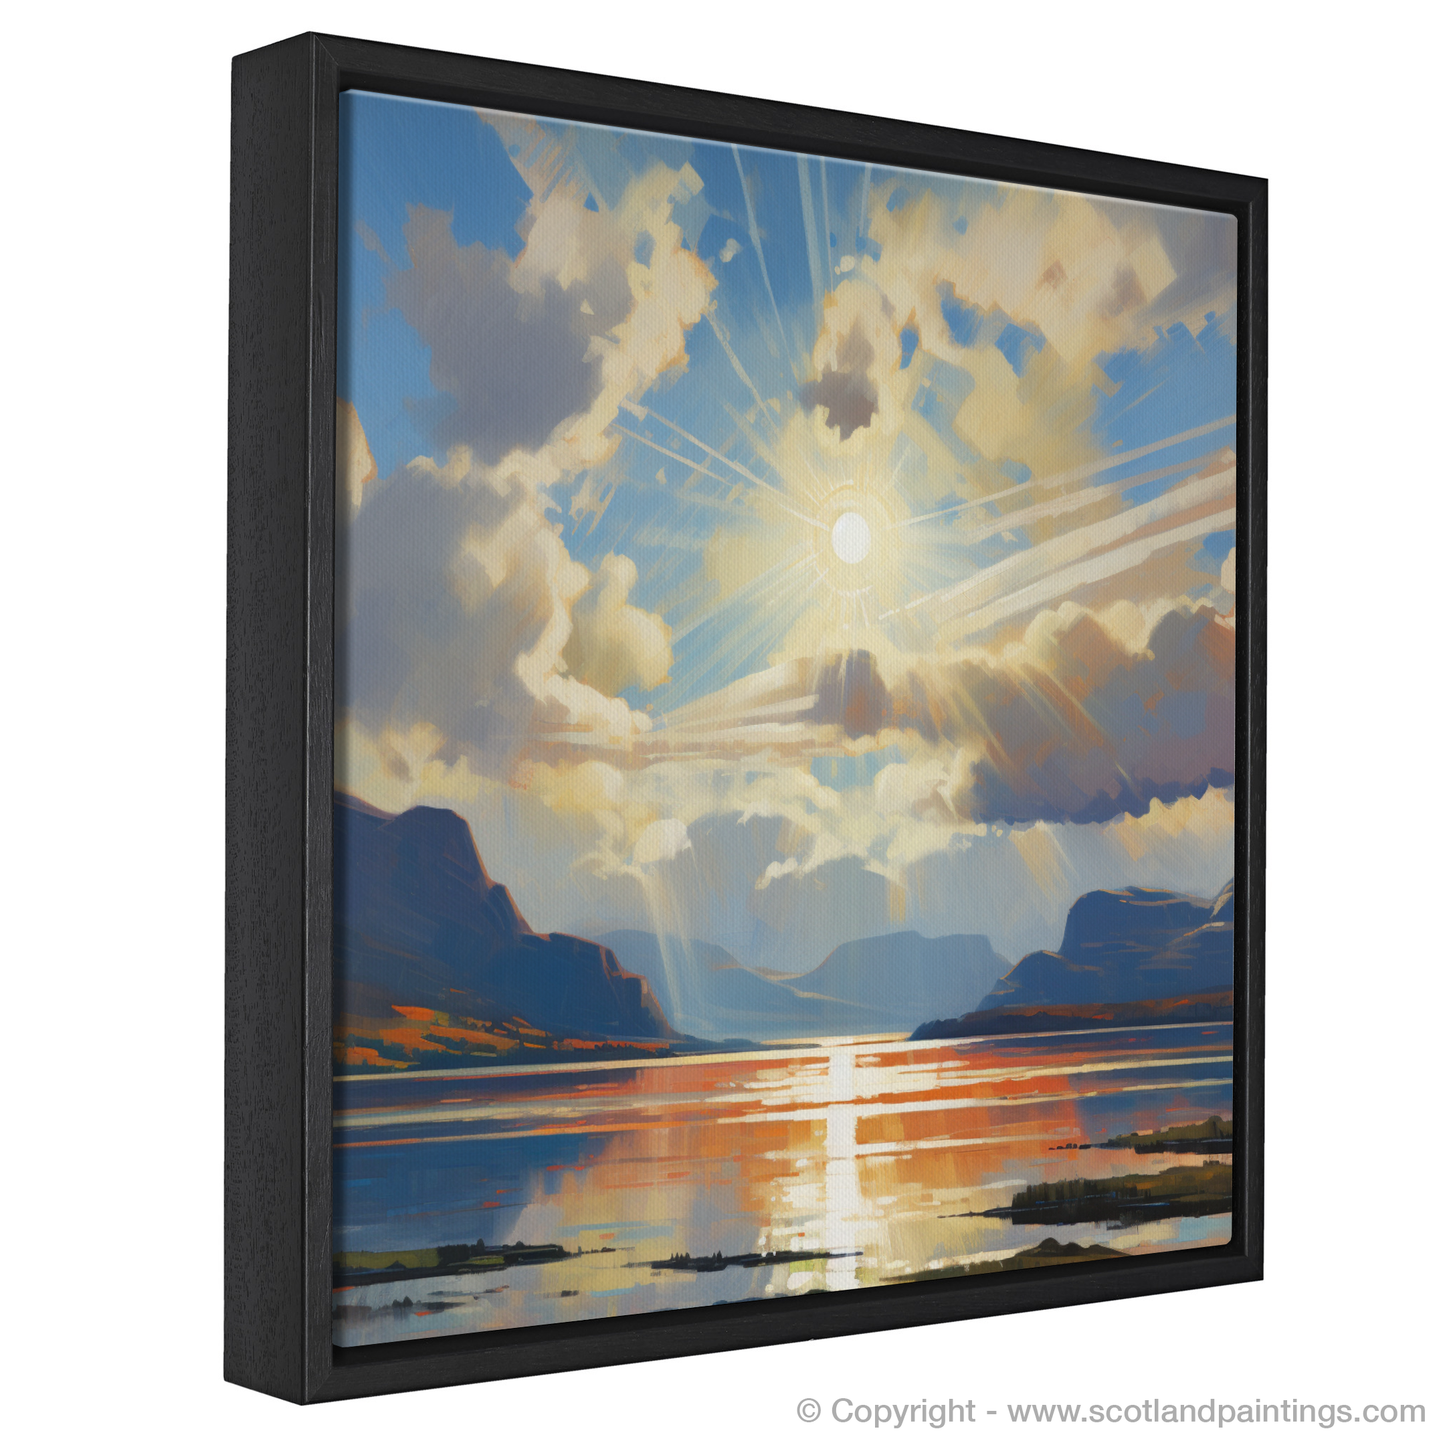 Painting and Art Print of Sun rays through clouds above Loch Lomond entitled "Sun Kissed Serenity Over Loch Lomond".